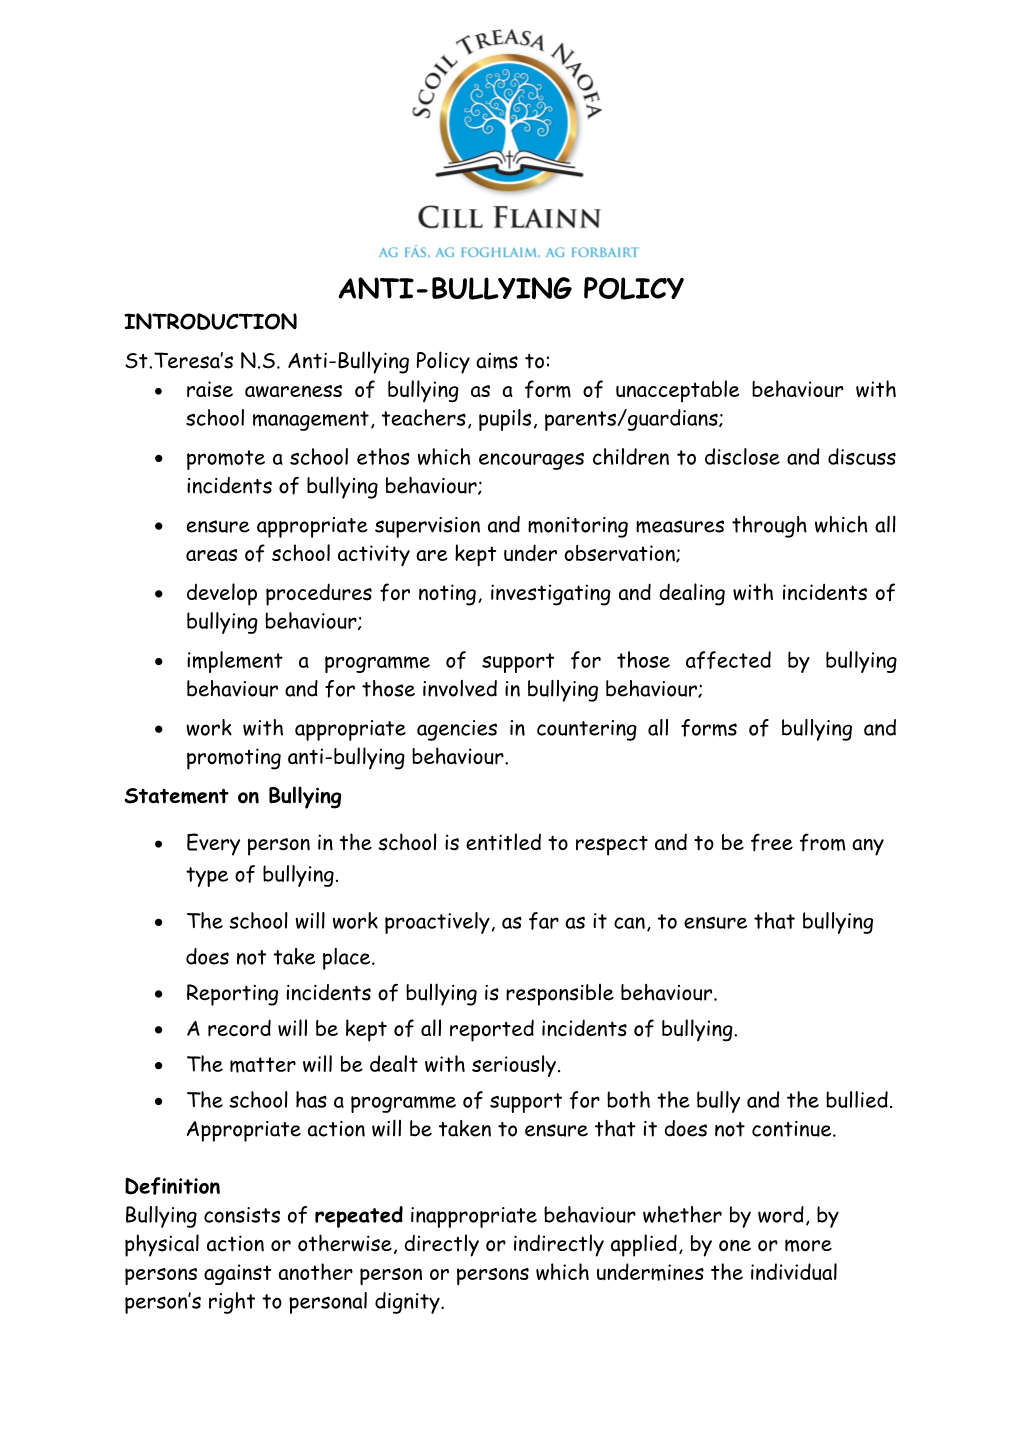 Anti-Bullying Policy s7